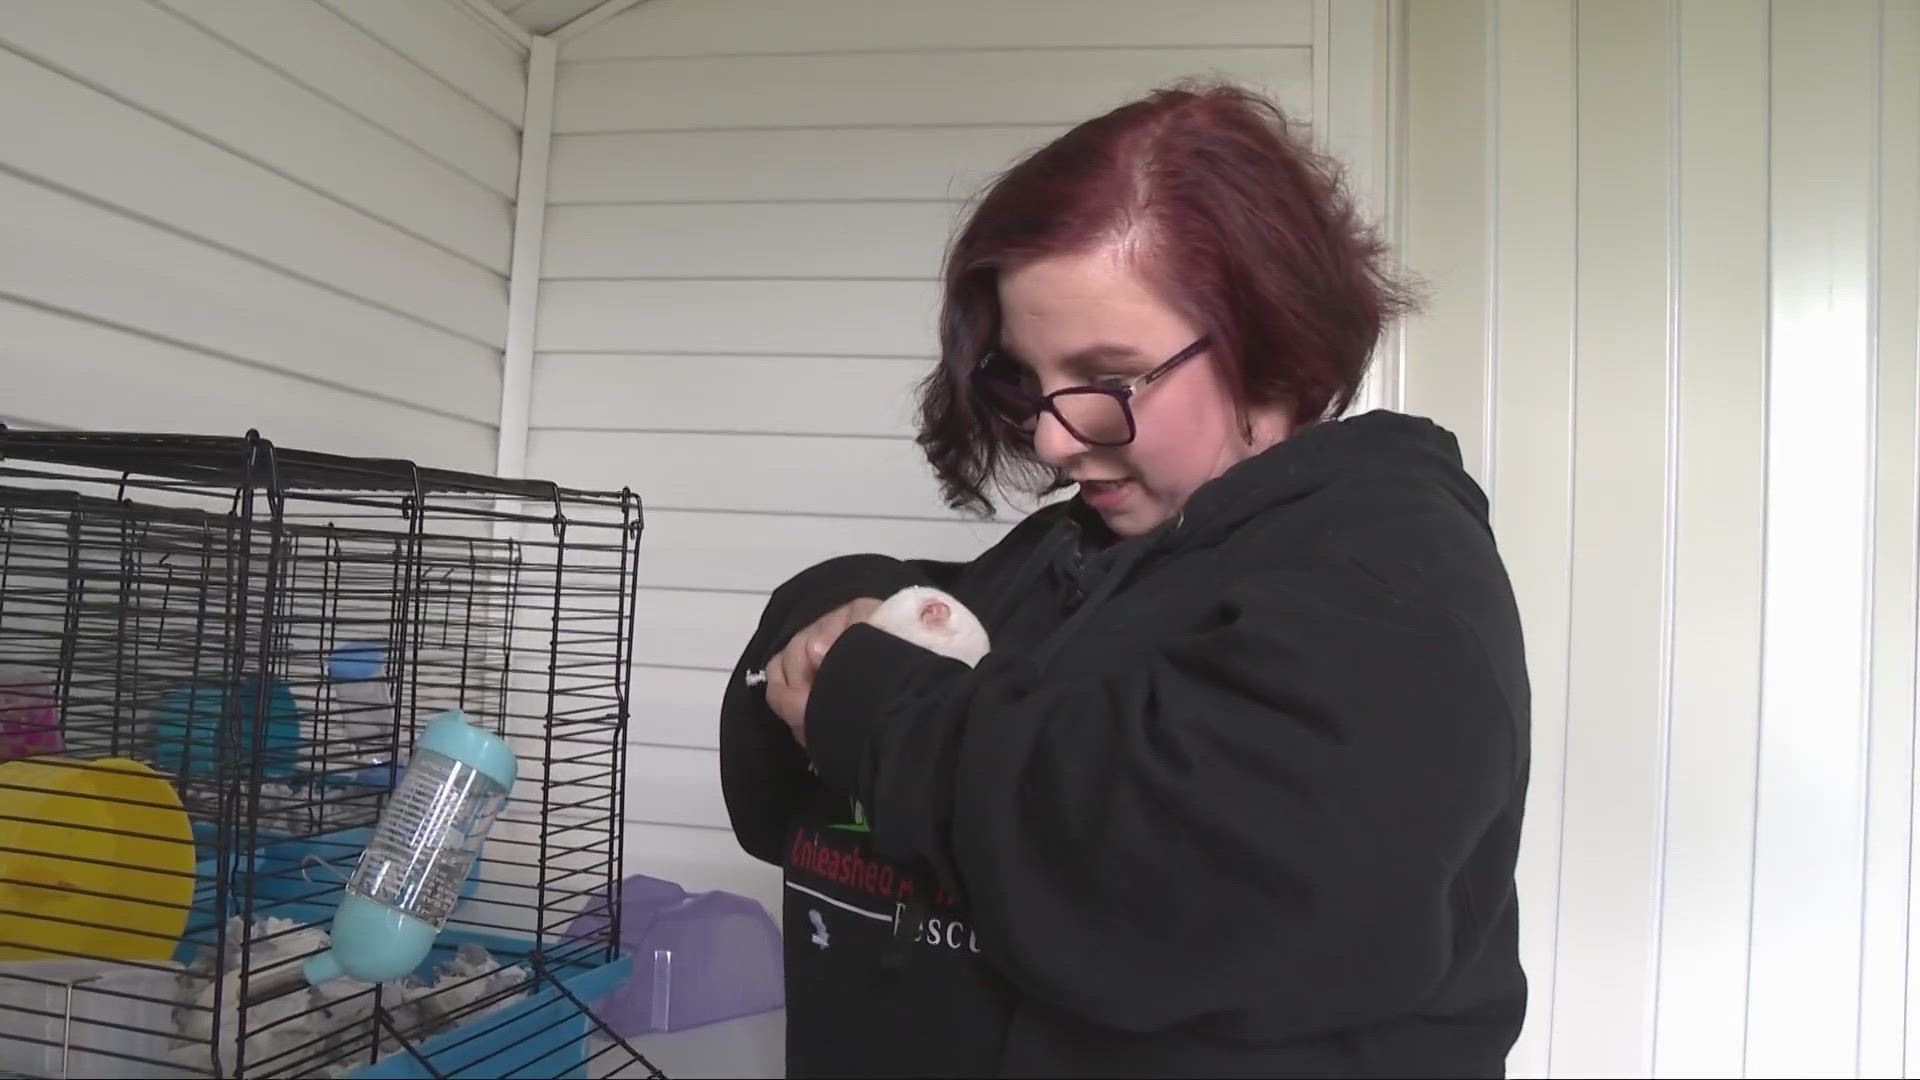 If she survived years of captivity and torture, Michelle Knight (now known as Lily Rose Lee) told herself she'd start an animal rescue. Her dreams are coming true.